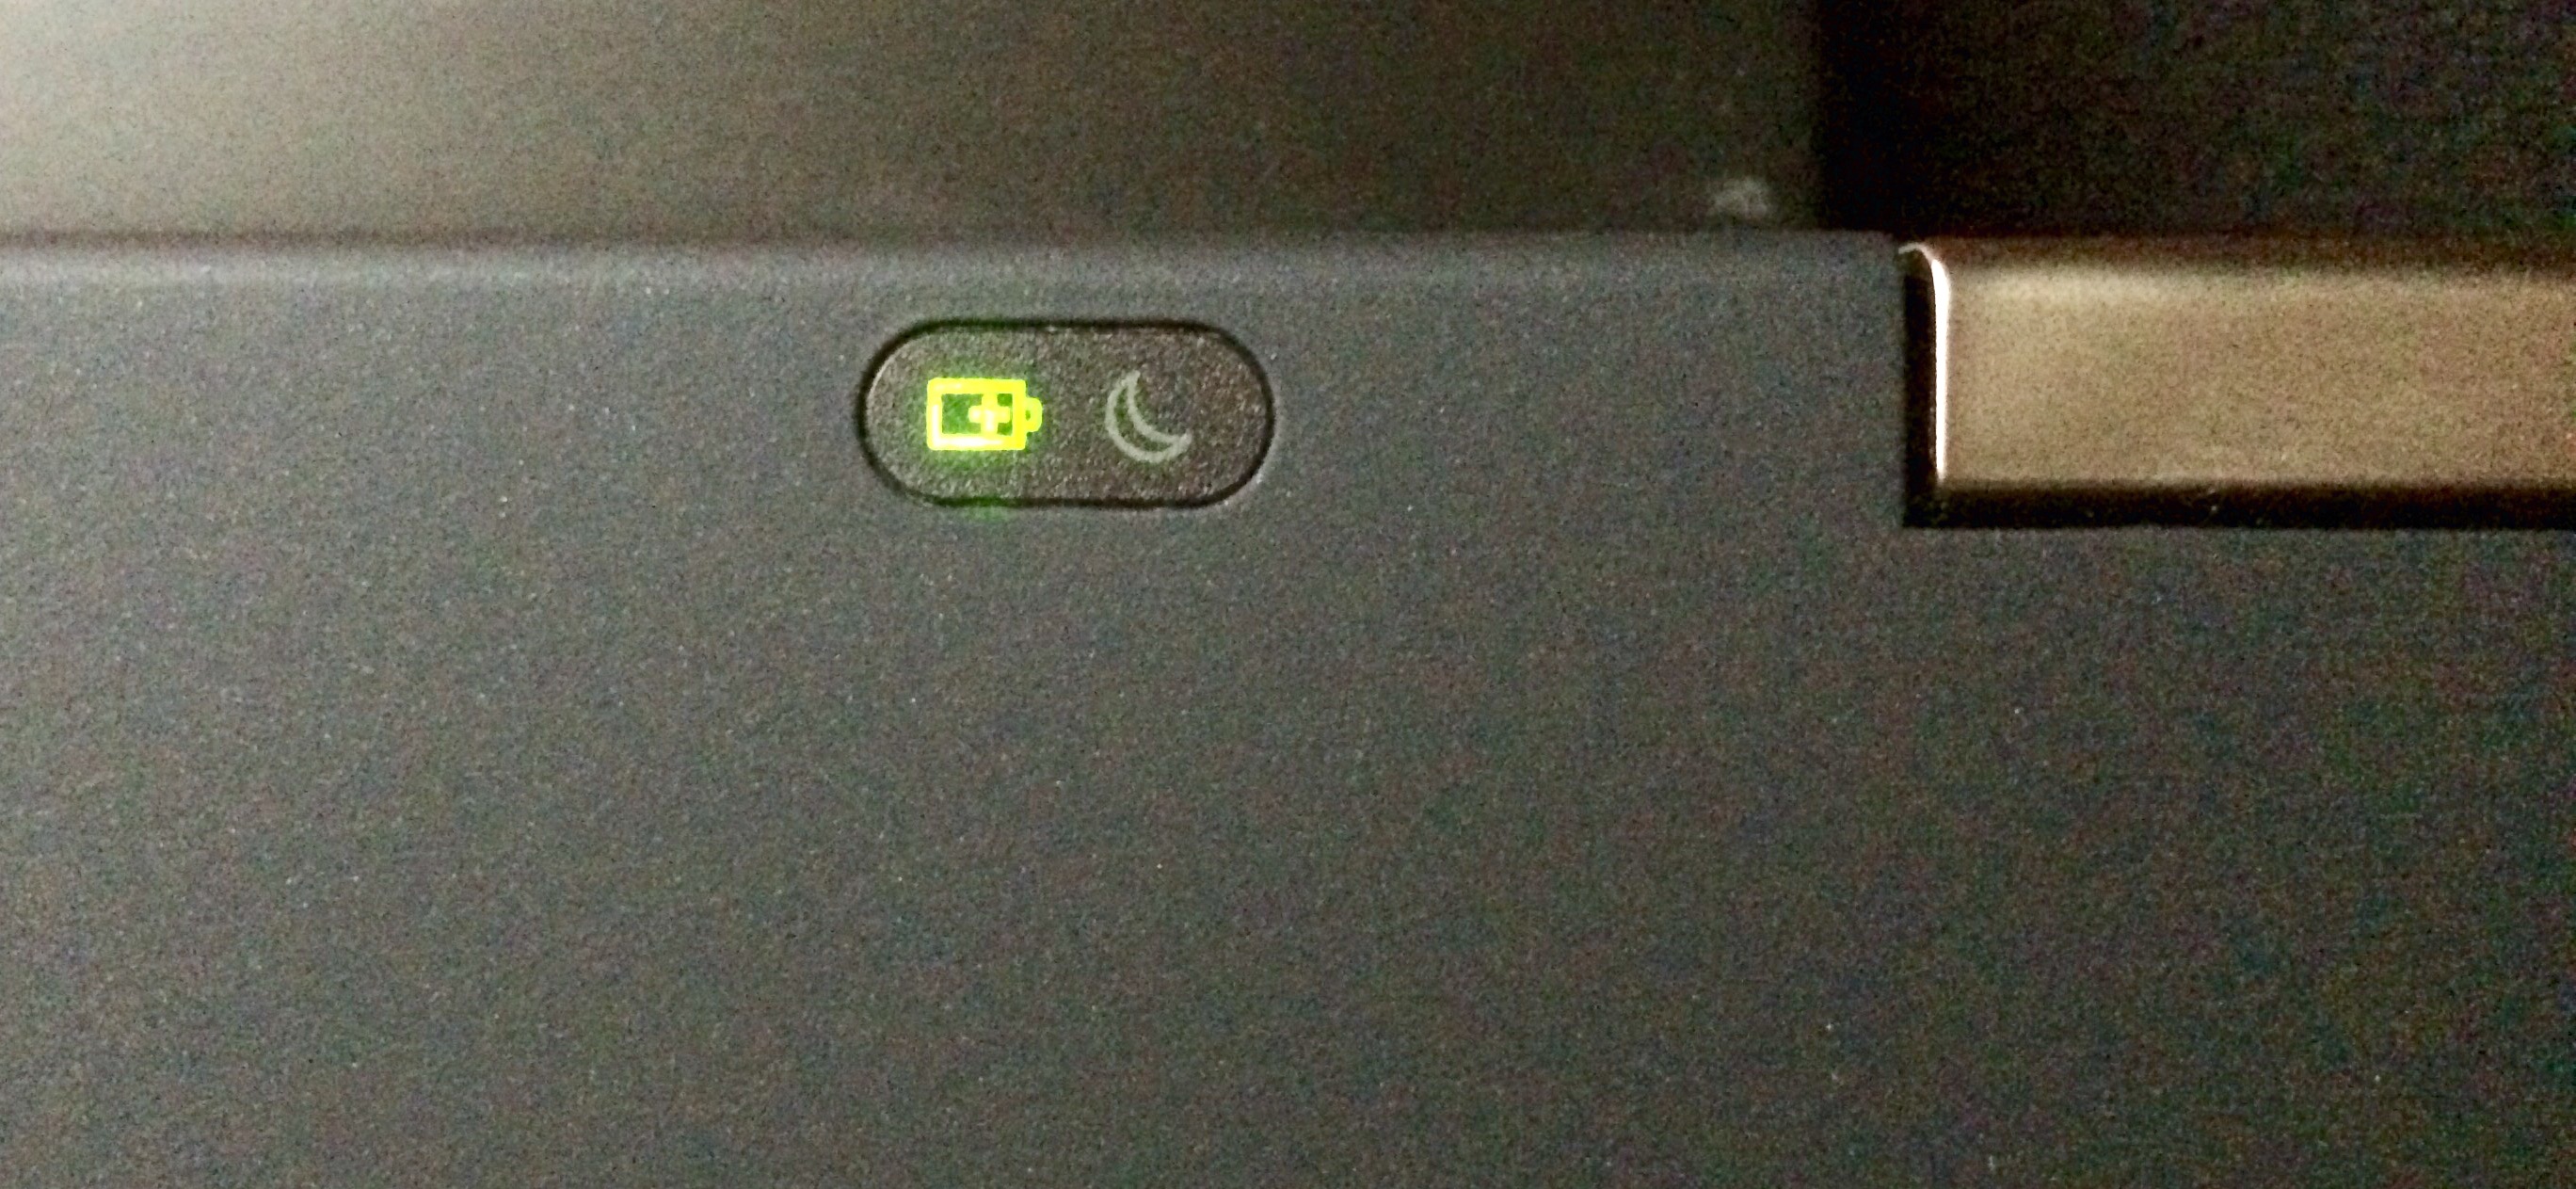 Lenovo thinkpad not charging when plugged in macbook pro display retina 13